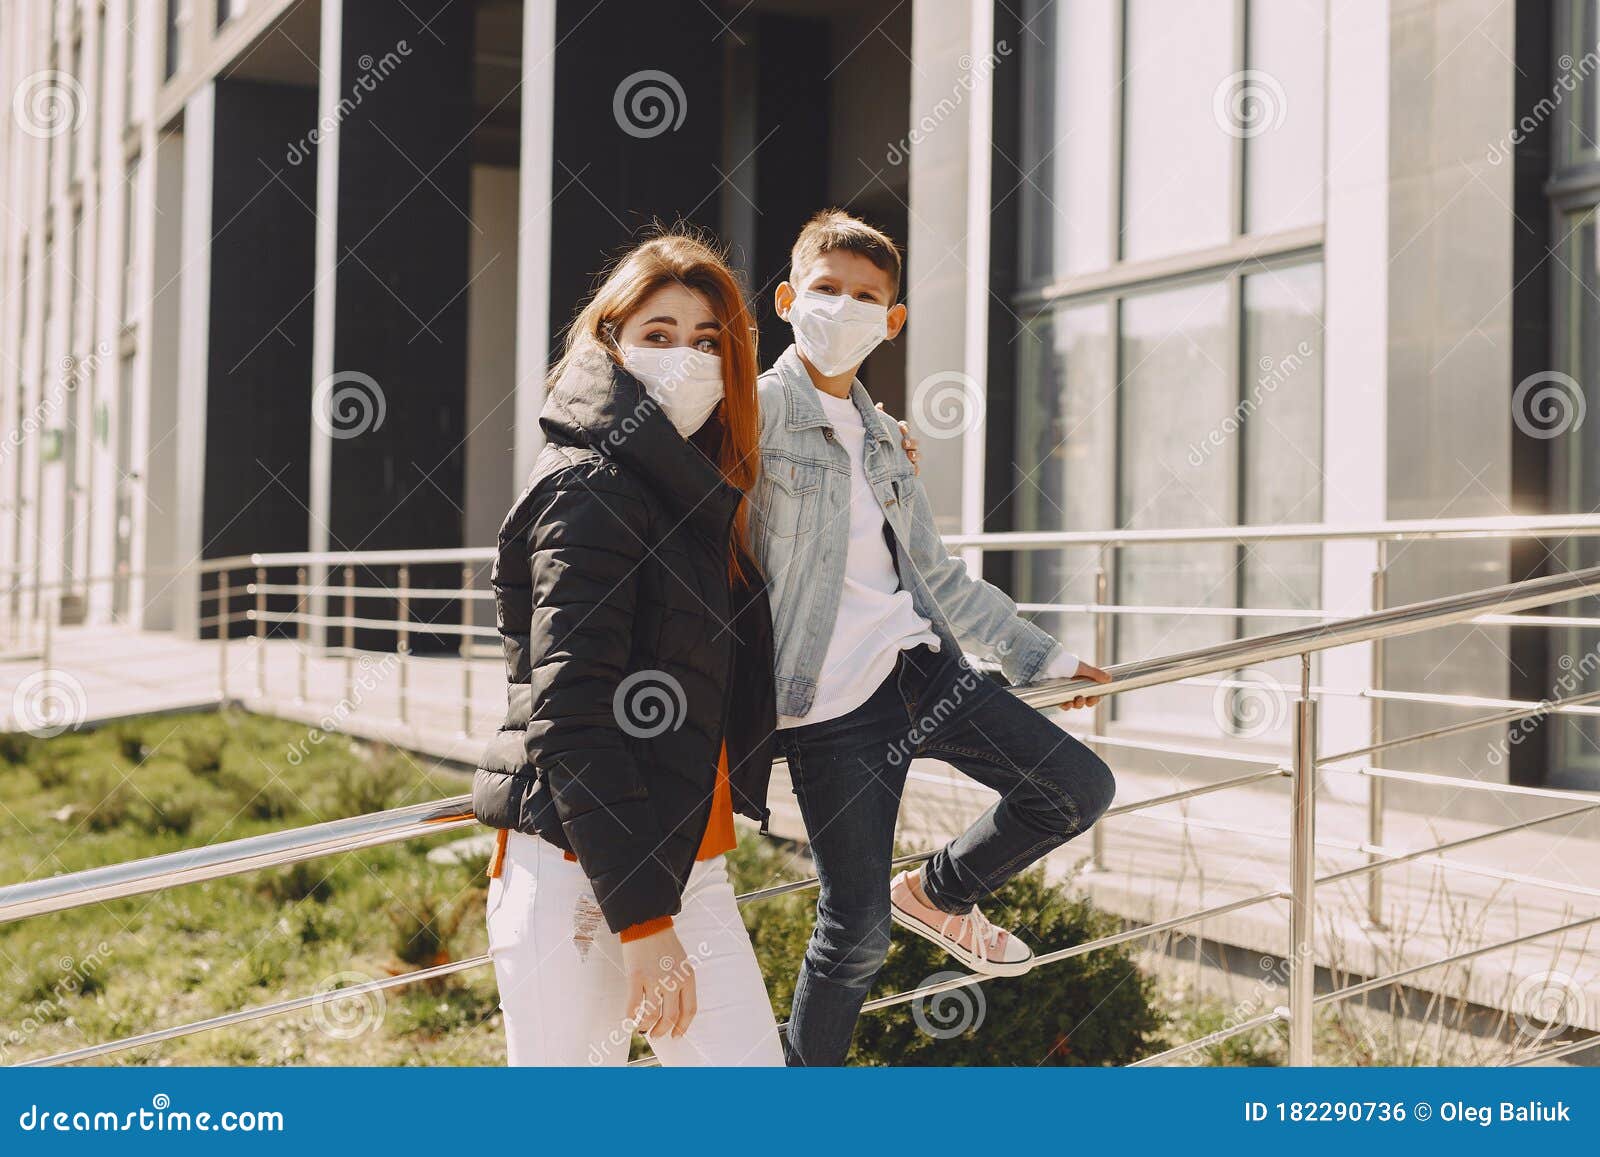 People in a Mask Standing on the Street Stock Photo - Image of adult ...